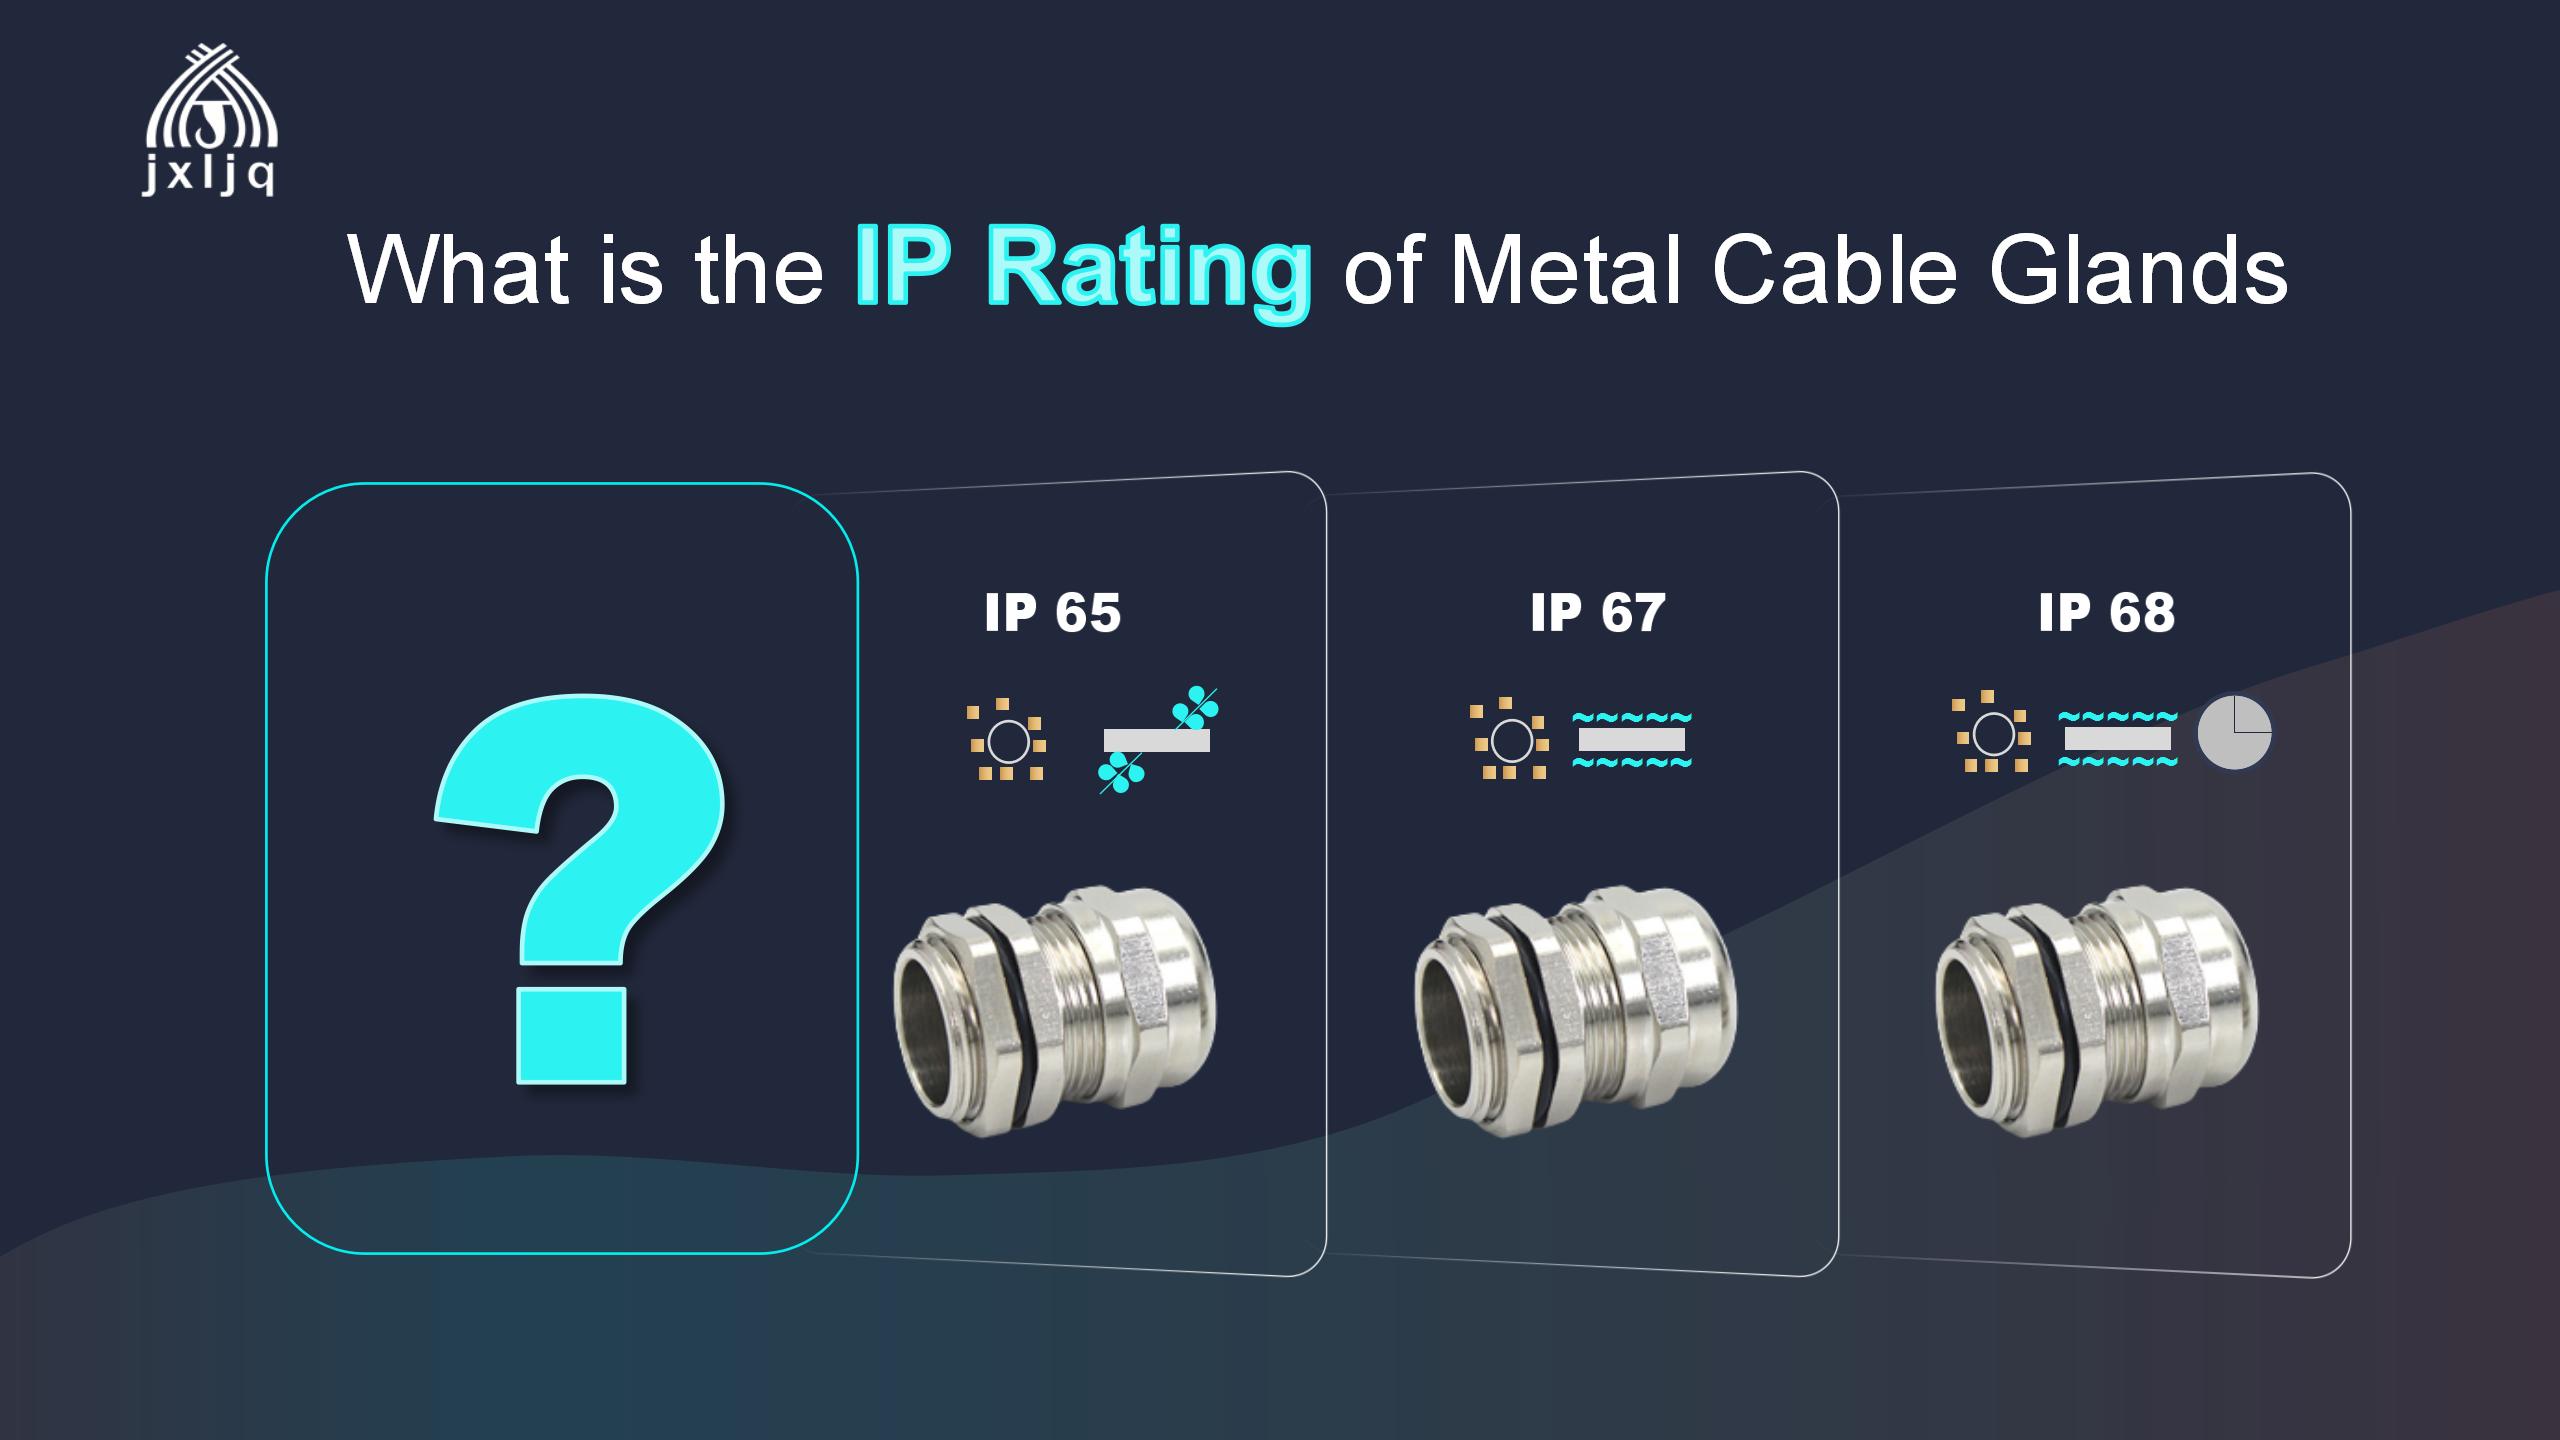 What is the IP Rating of Metal Cable Glands?